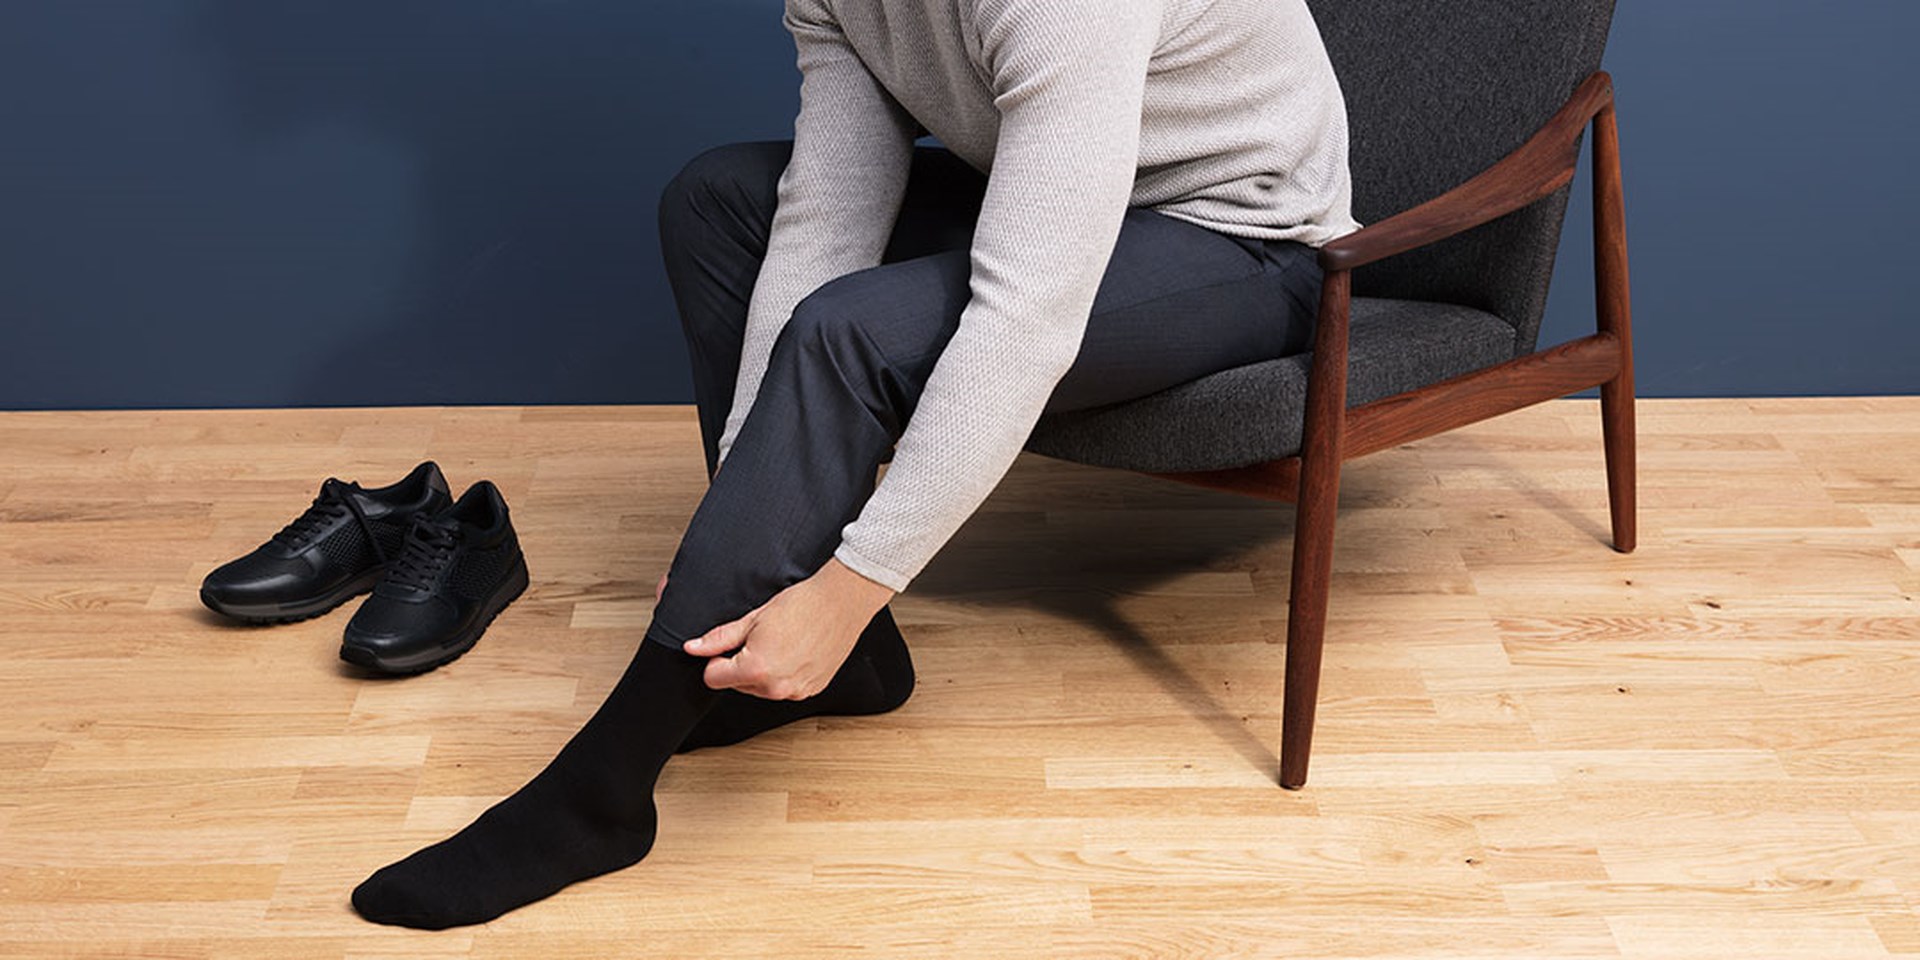 How to put on and take off compression stockings